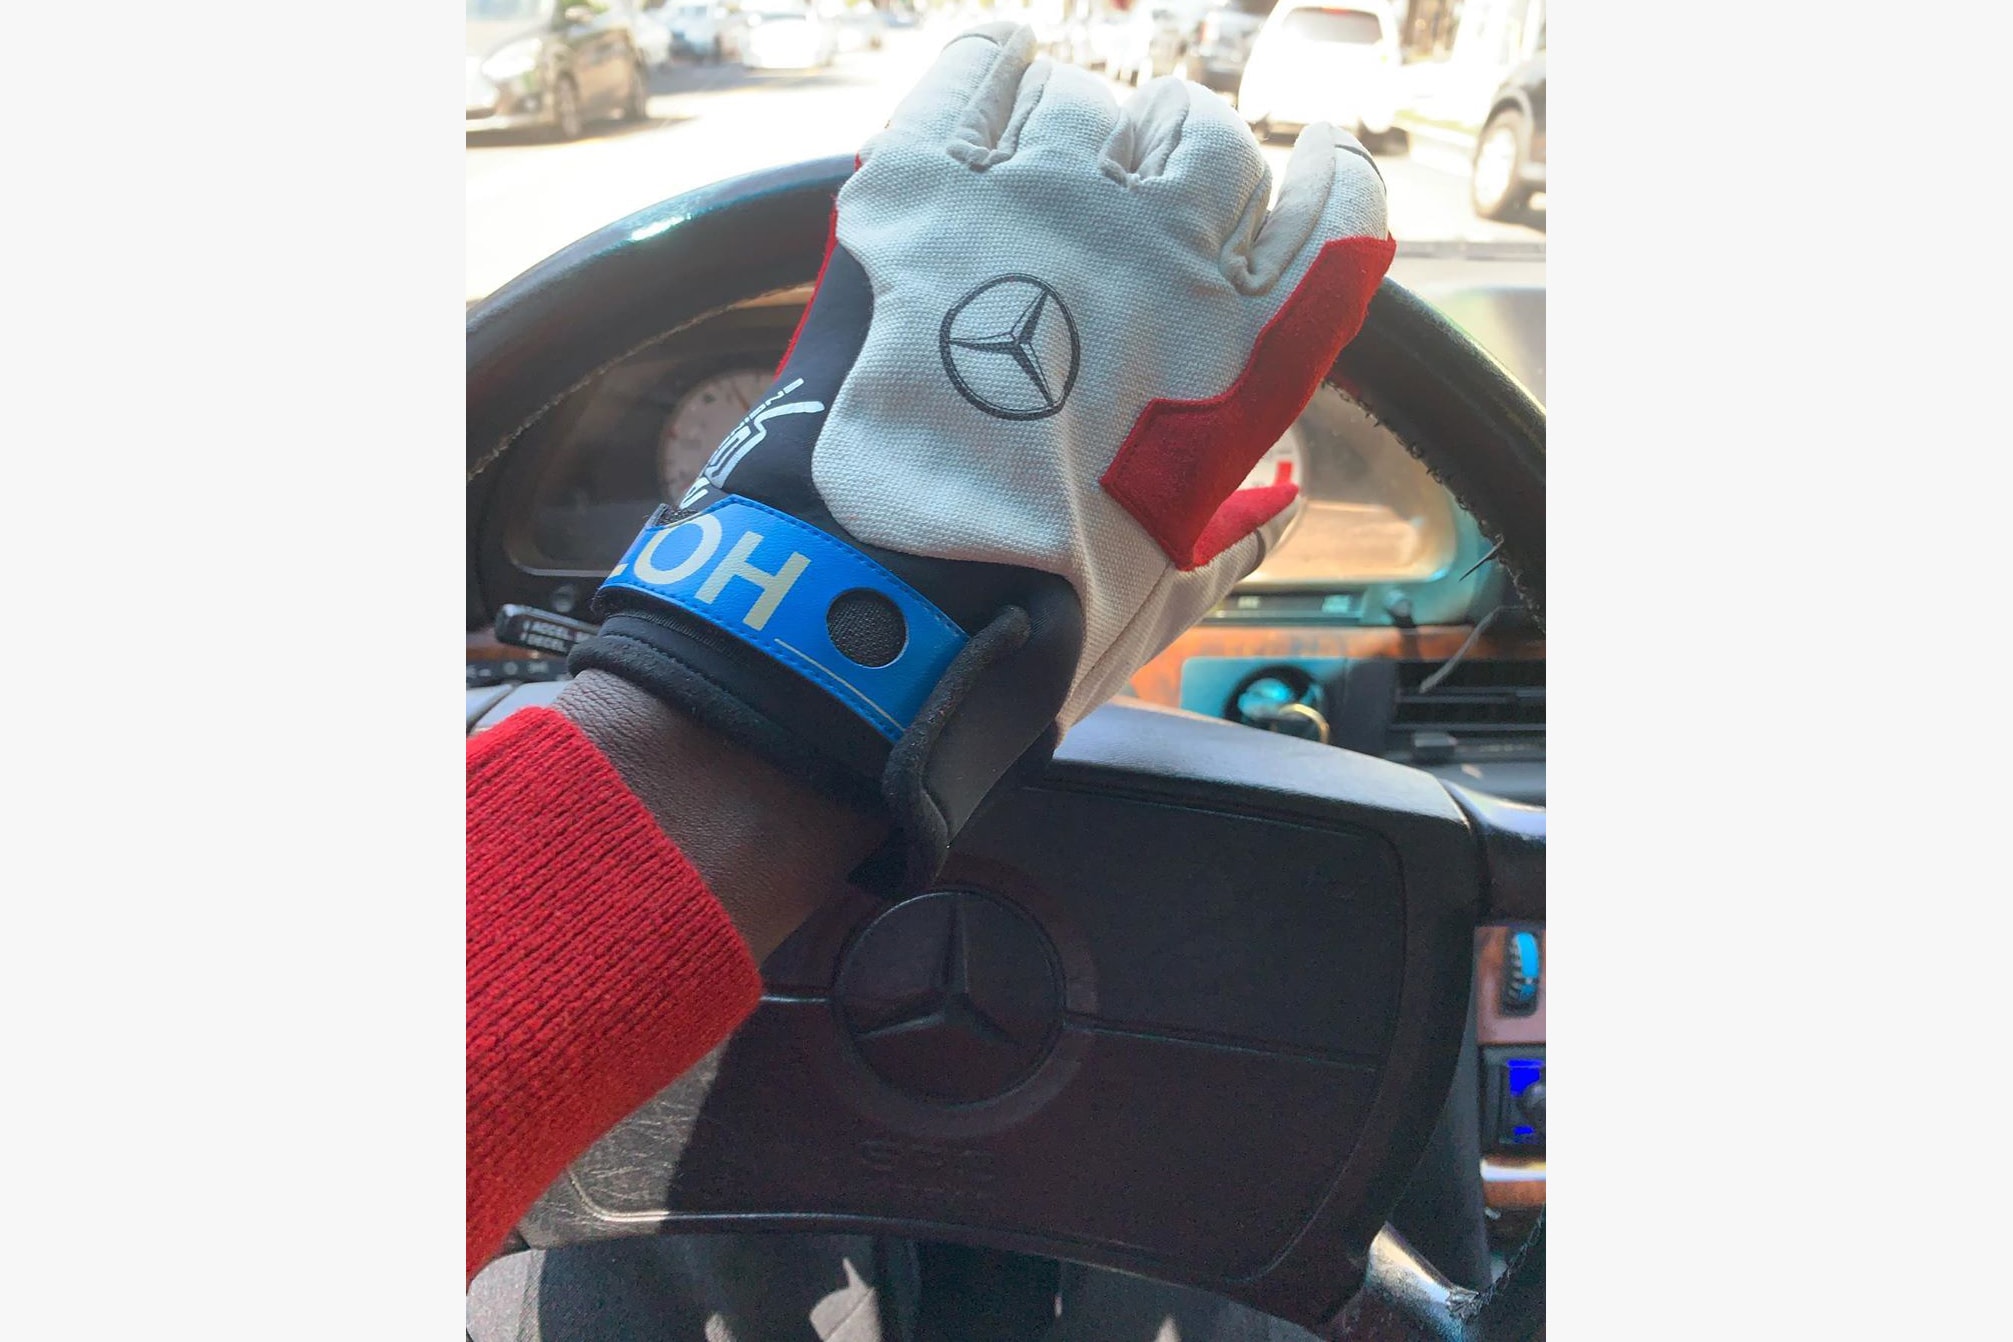 A$AP Nast Gifts Virgil Abloh Mercedes-Benz Racing Gloves G-Wagon S class racing style fashion ASAP NAST Instagram Classic cars 